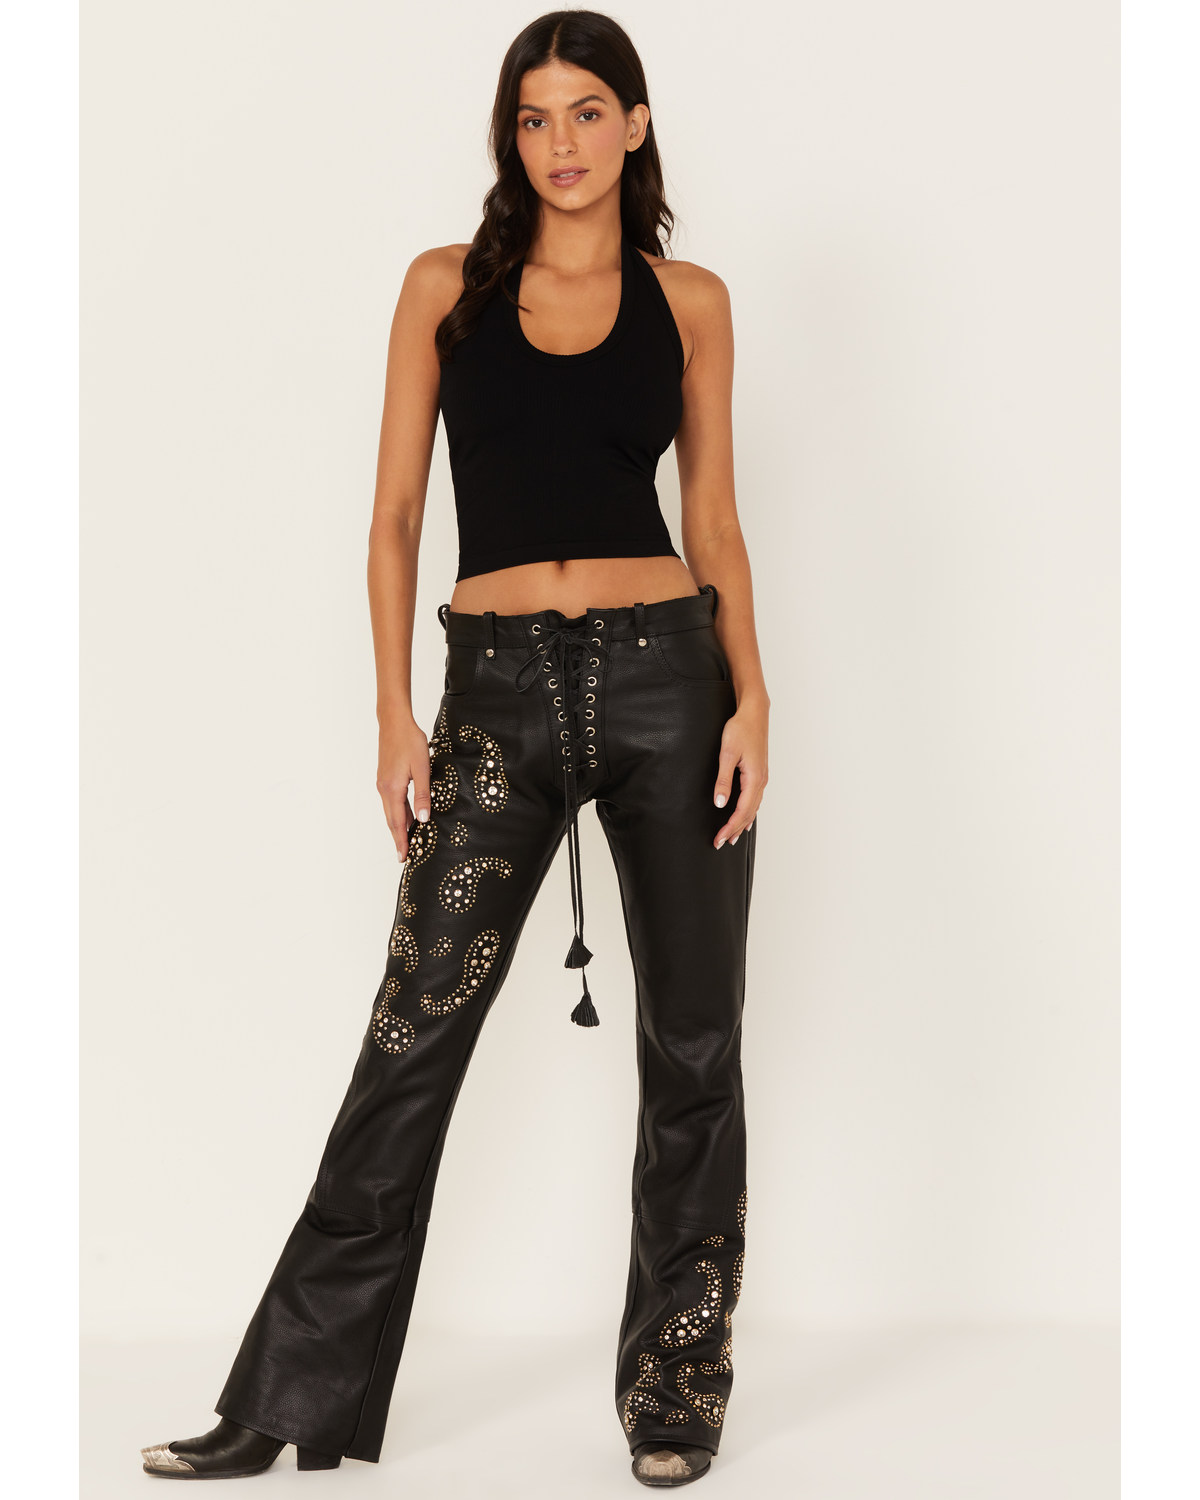 Boot Barn X Understated Leather Women's Rhinestone Studded Lace-Up Flare Pants